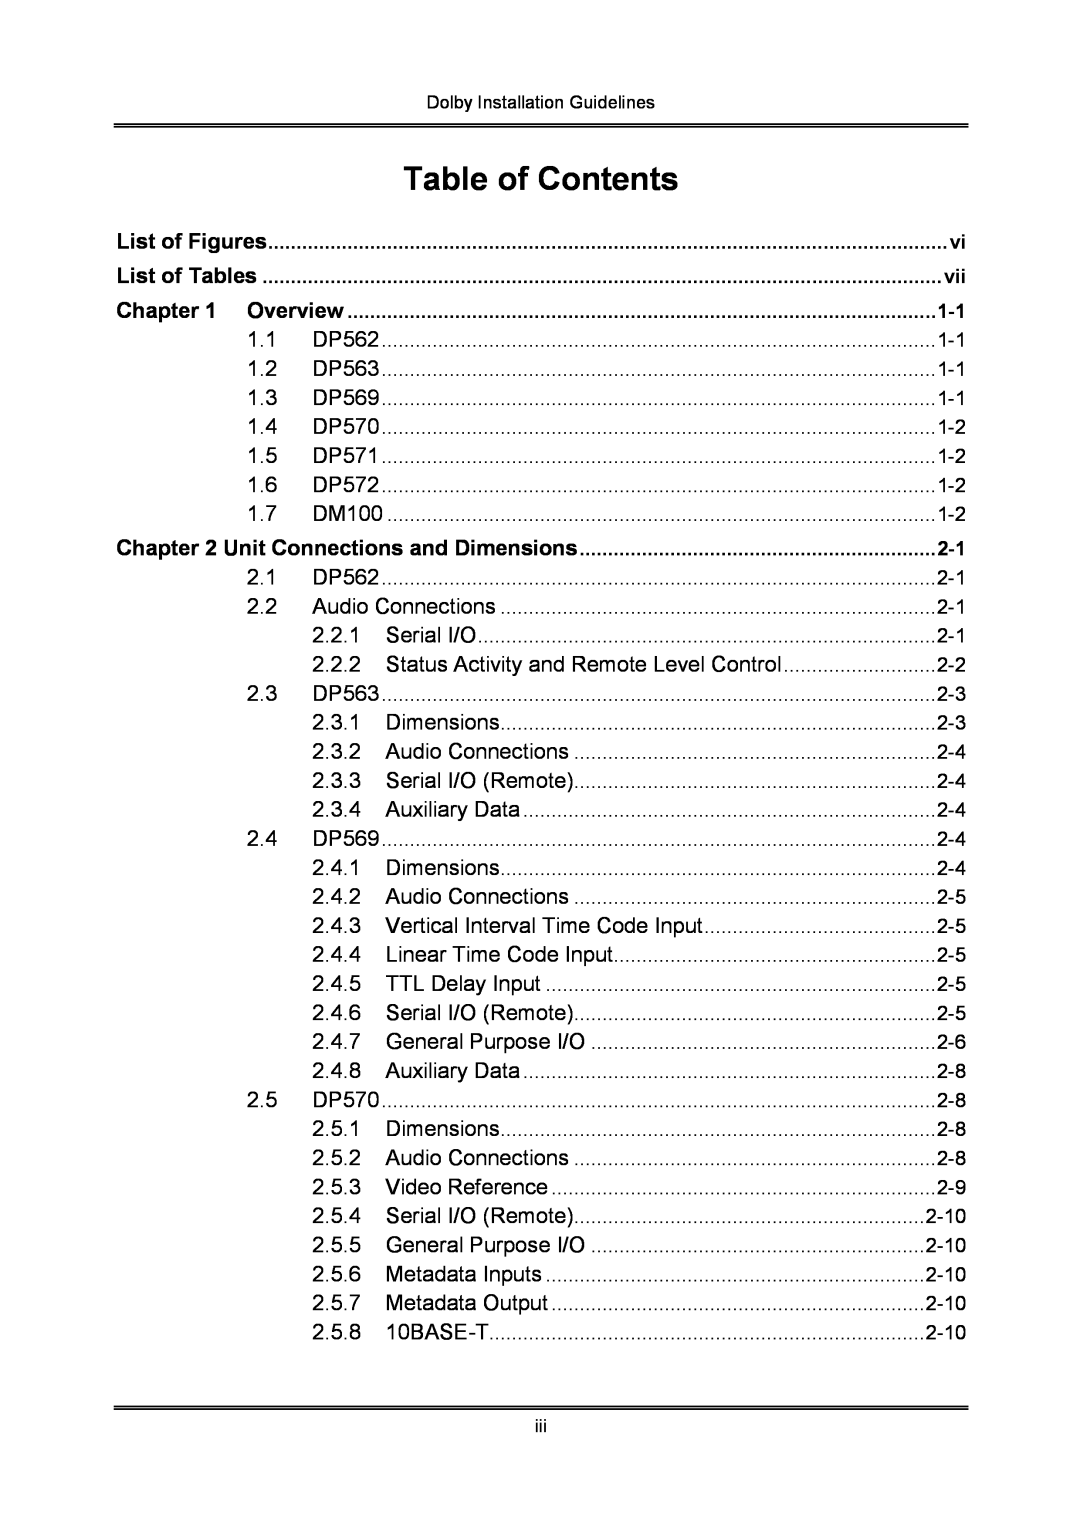 Dolby Laboratories S01/13621 manual Table of Contents 